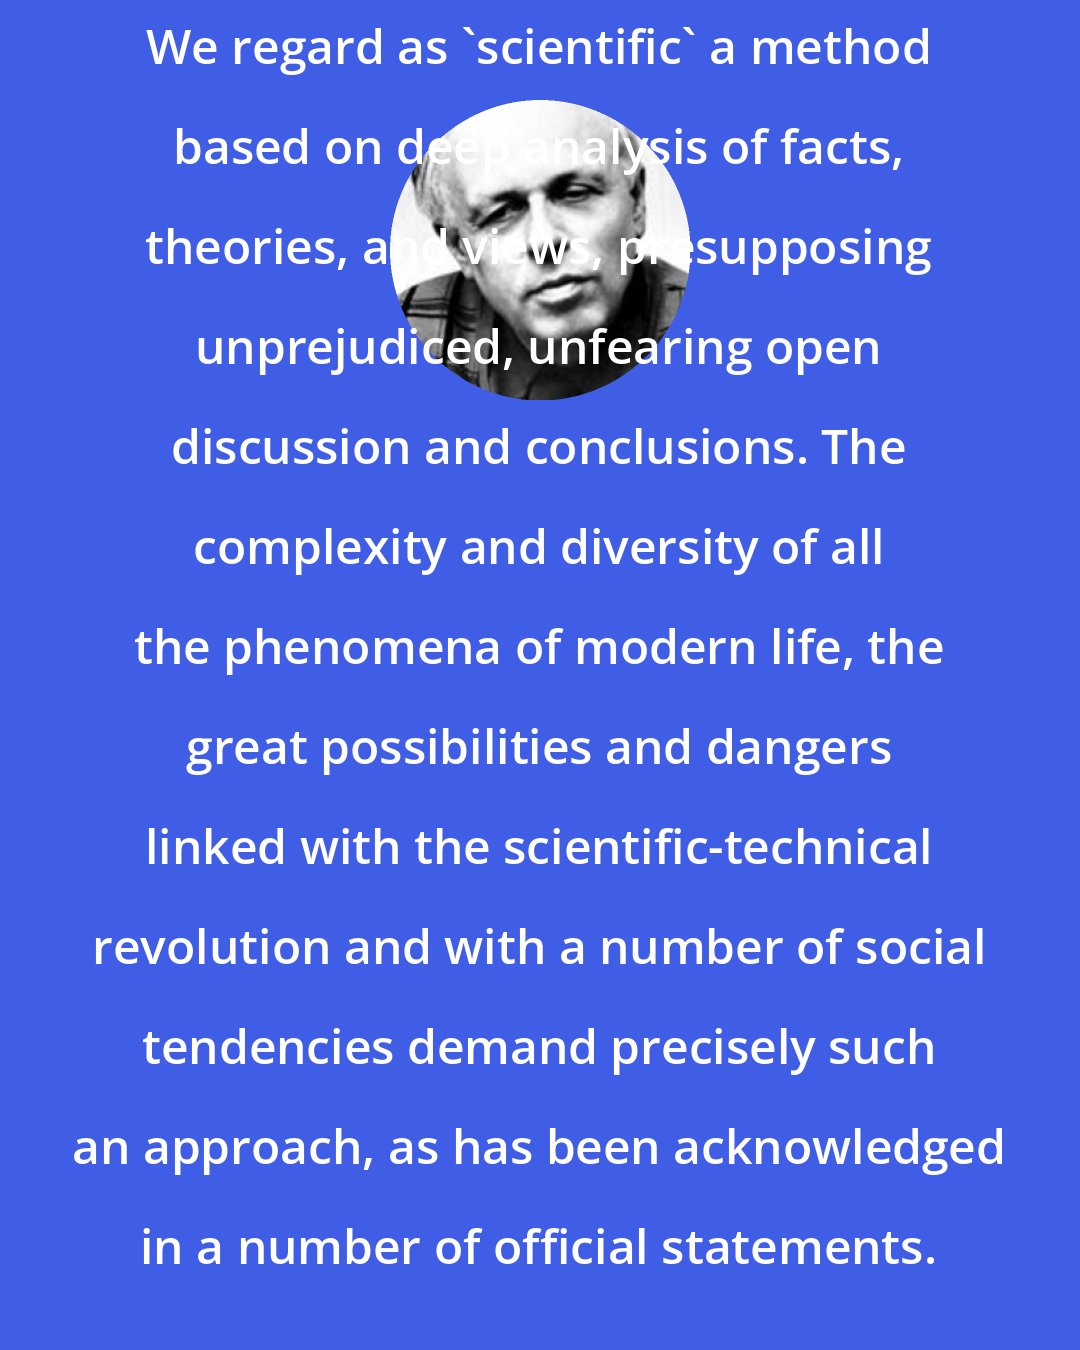 Andrei Sakharov: We regard as 'scientific' a method based on deep analysis of facts, theories, and views, presupposing unprejudiced, unfearing open discussion and conclusions. The complexity and diversity of all the phenomena of modern life, the great possibilities and dangers linked with the scientific-technical revolution and with a number of social tendencies demand precisely such an approach, as has been acknowledged in a number of official statements.